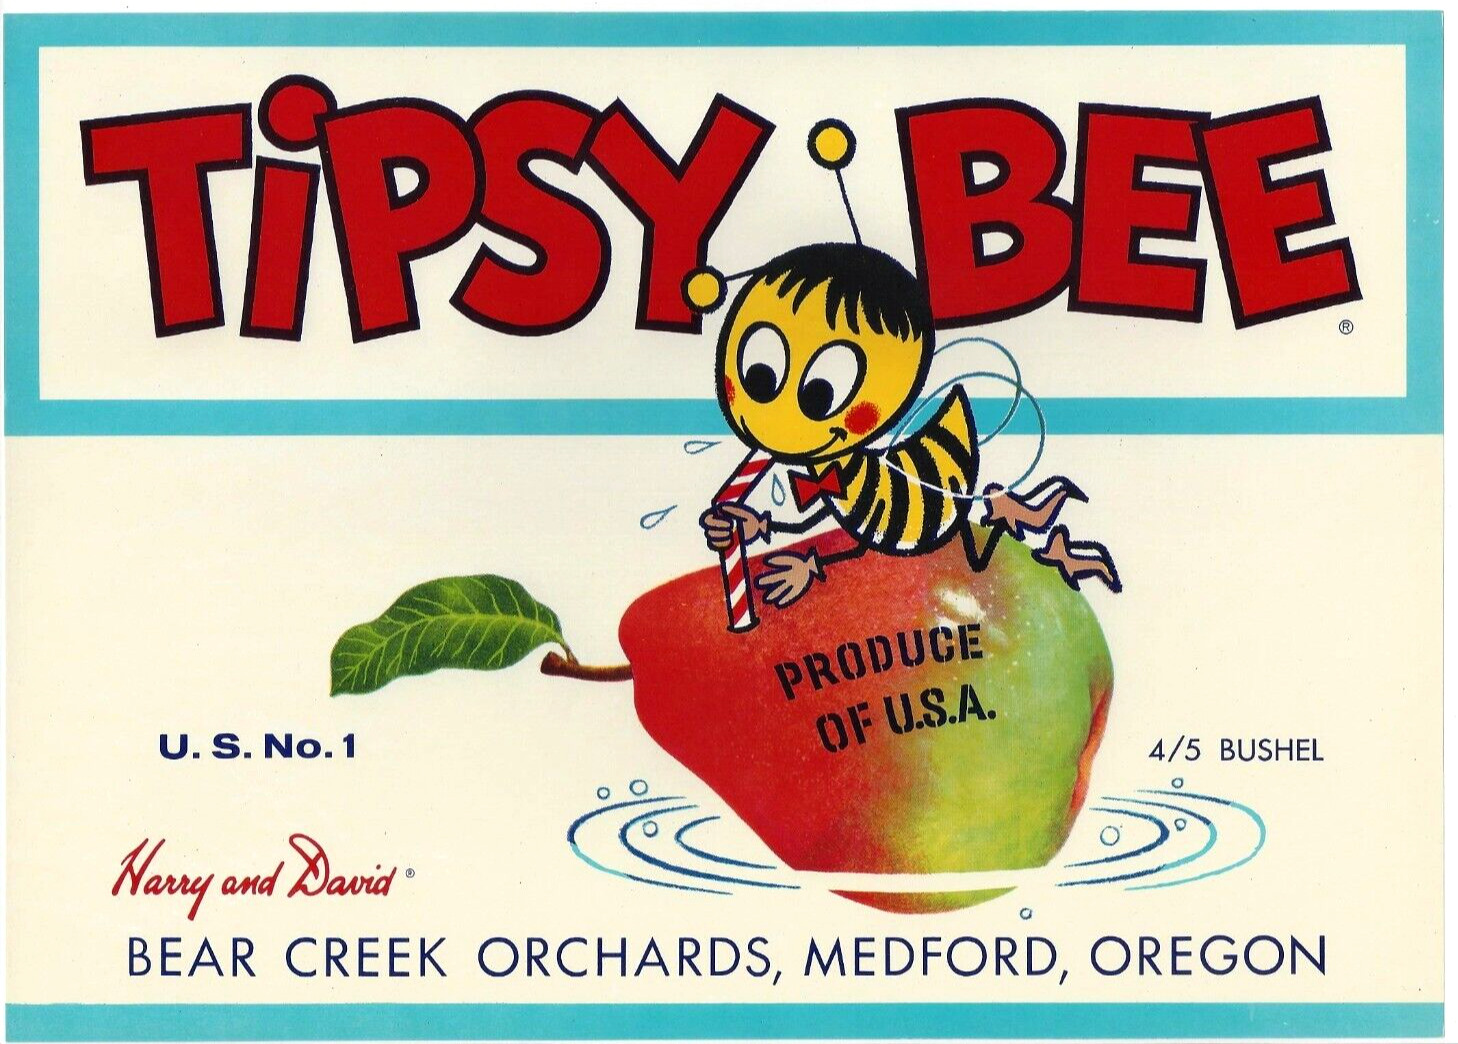 Original TIPSY BEE pear crate label Harry David Medford OR Bear Creek Orchards